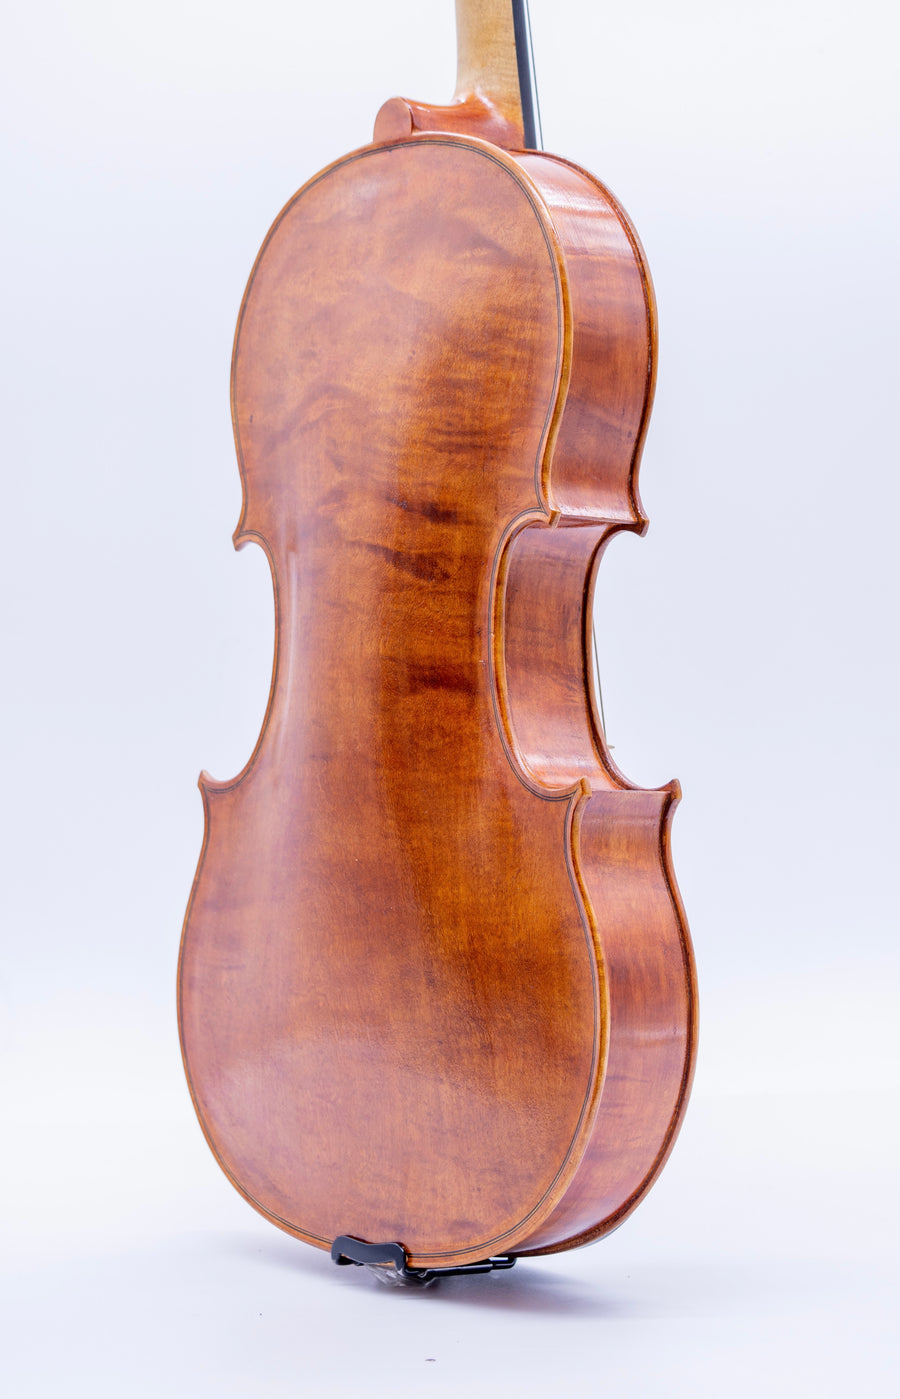 A Contemporary American Viola By Todd Goldenberg, 2014. 16 1/4.”